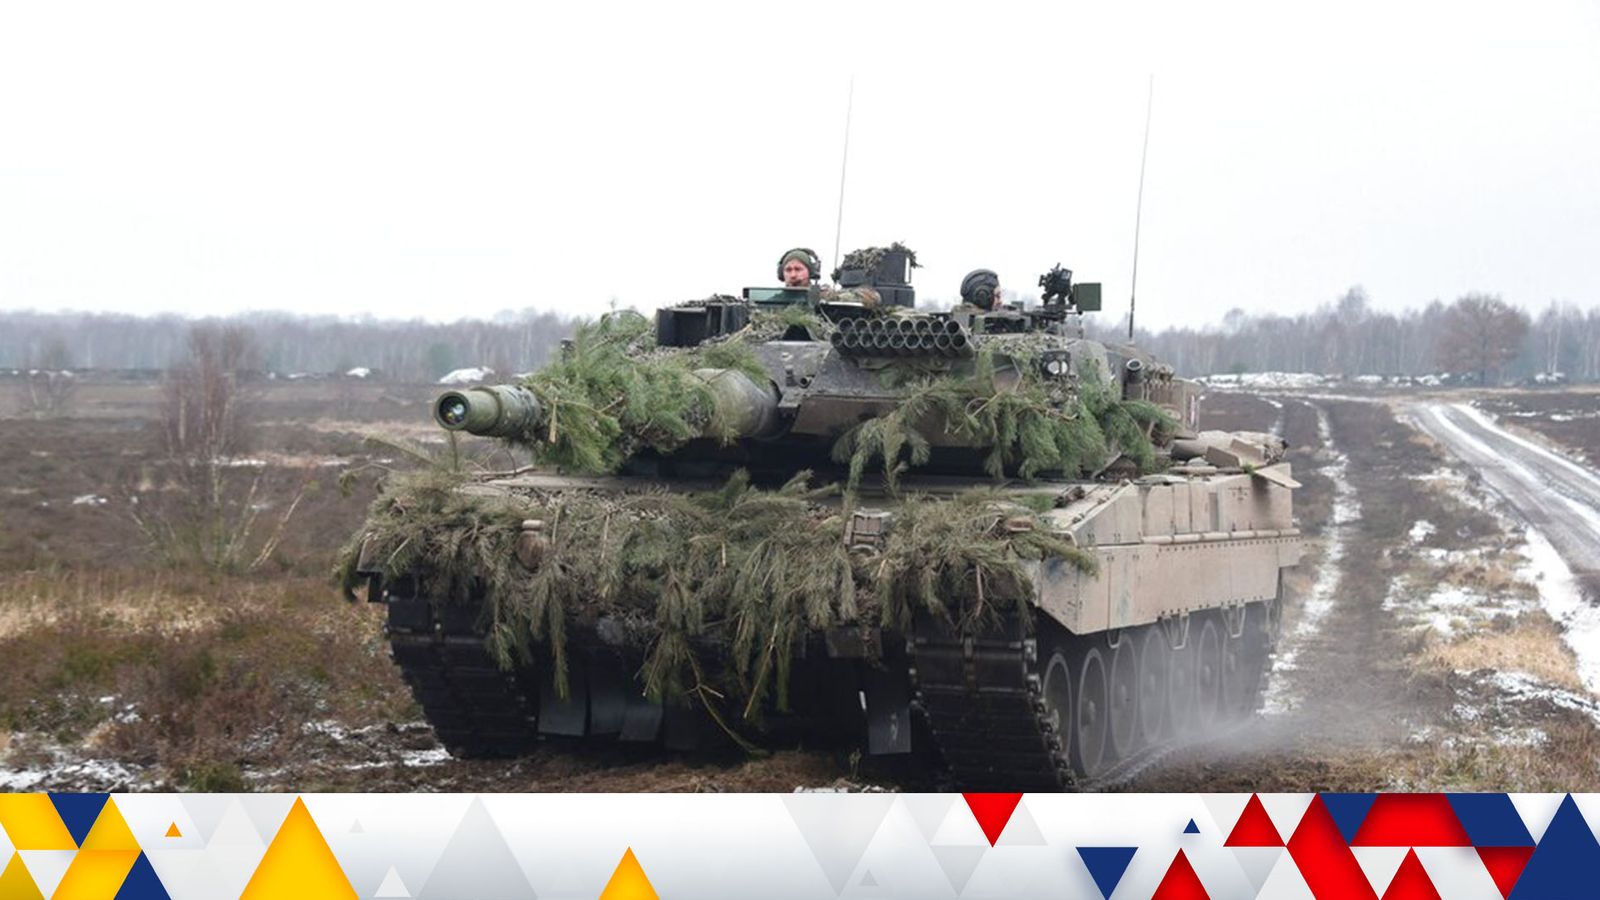 Germany asked for permission to send Leopard 2 tanks to Ukraine, UK defence secretary reveals